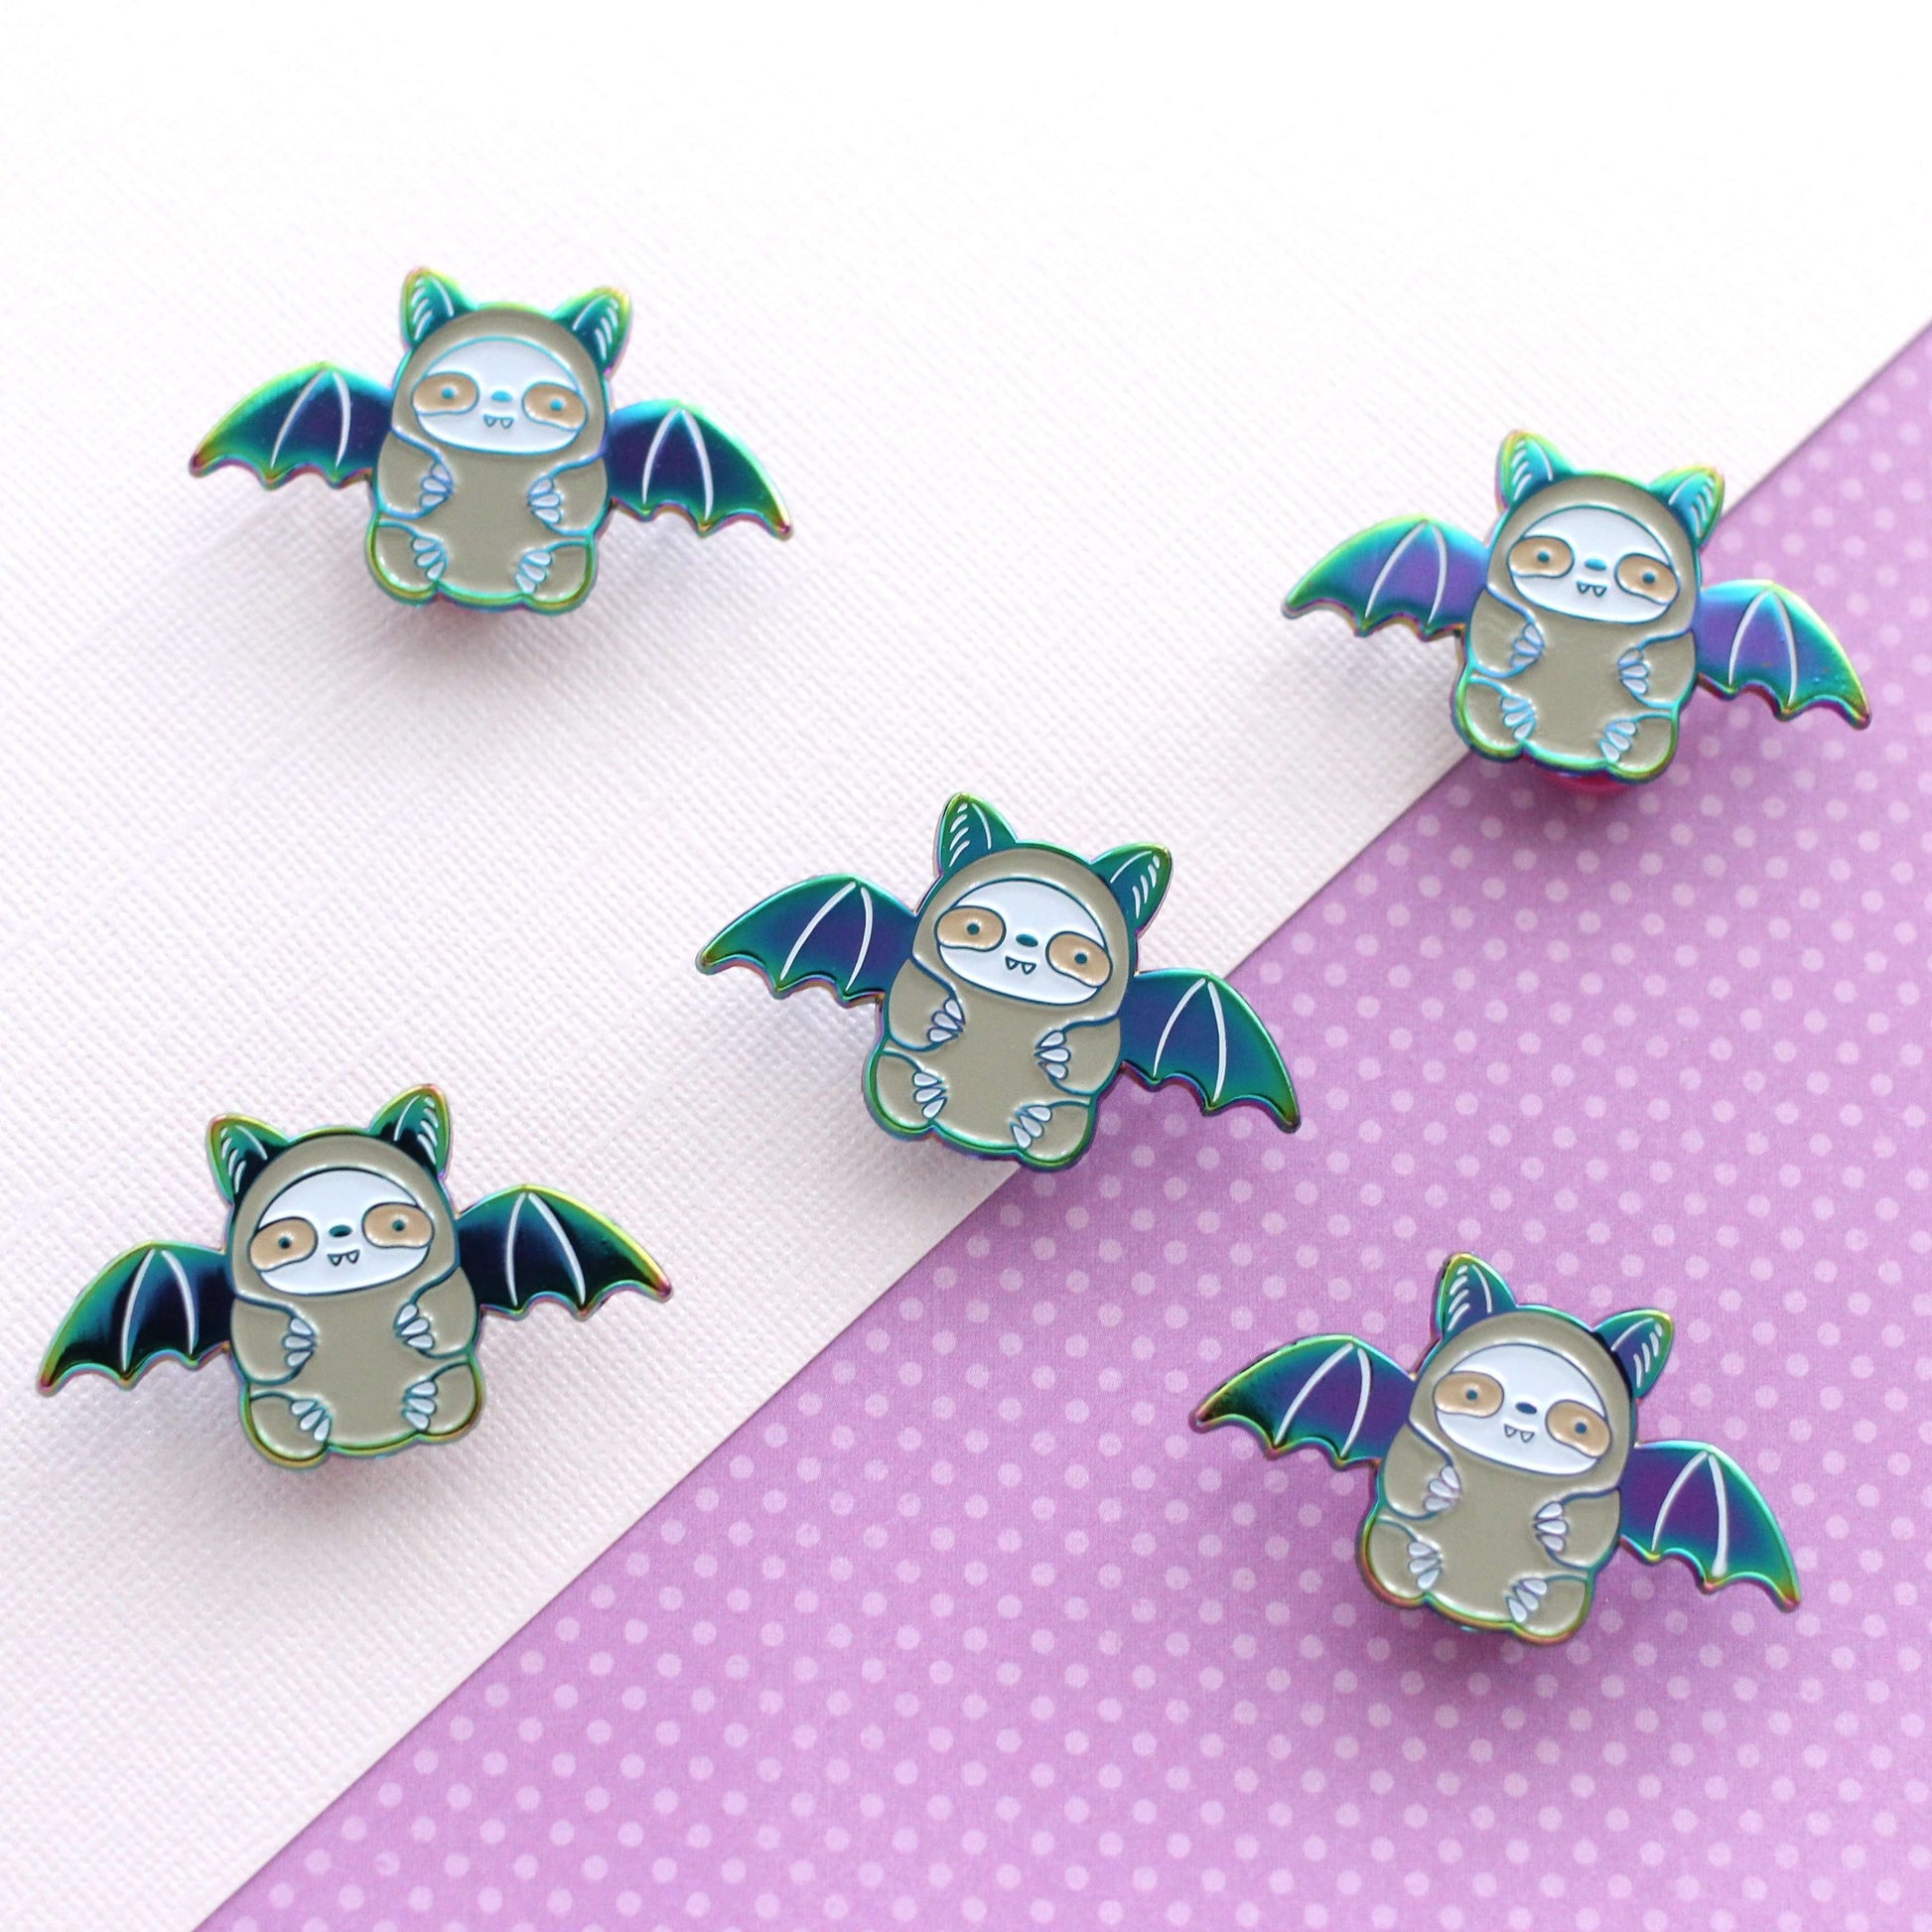 Bat Sloth Enamel Pin - Sloth Gift - Halloween Pin - Monster Accessory by Wild Whimsy Woolies